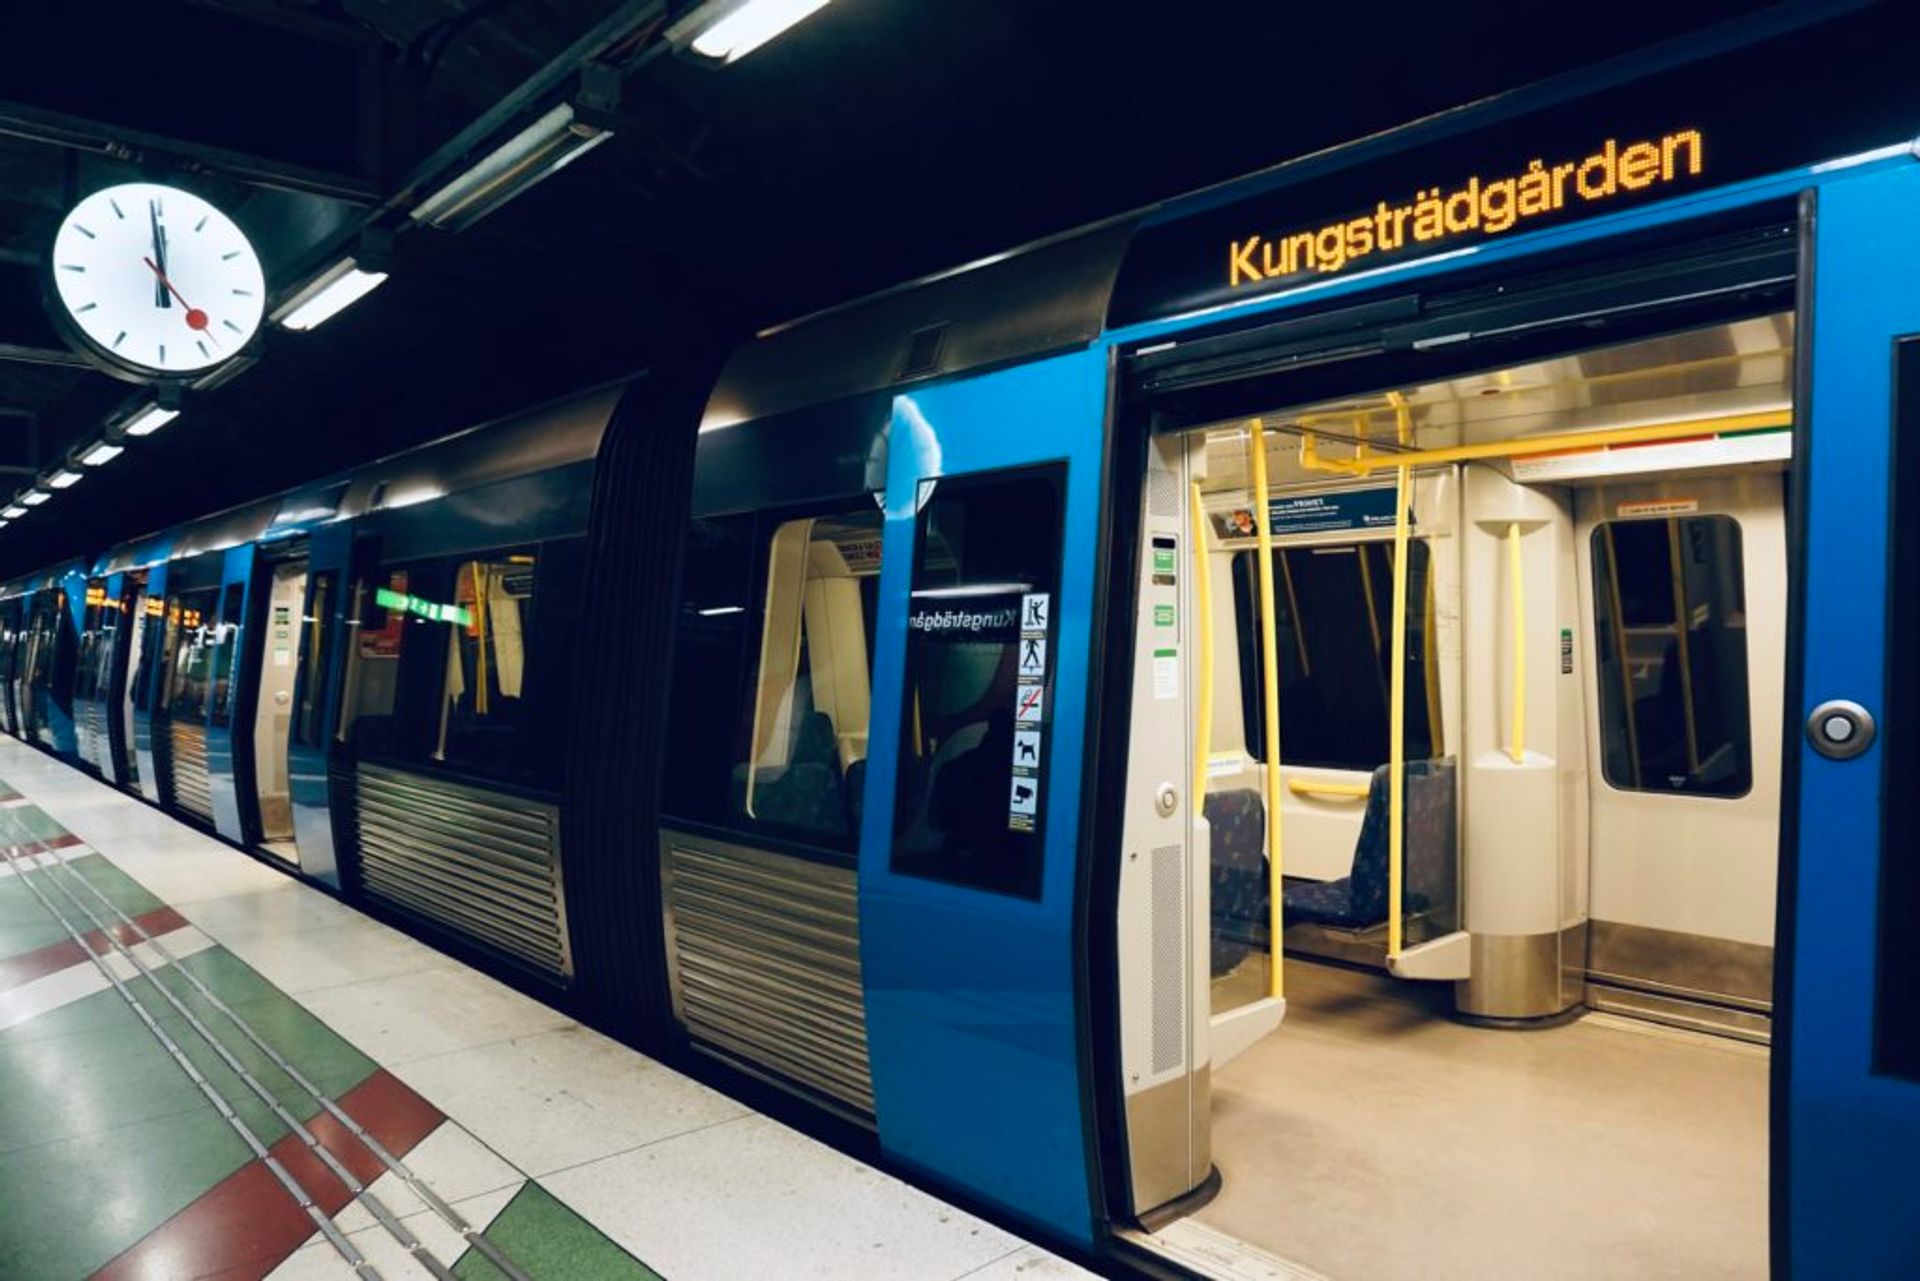 New, blue metro trains at a metro station.